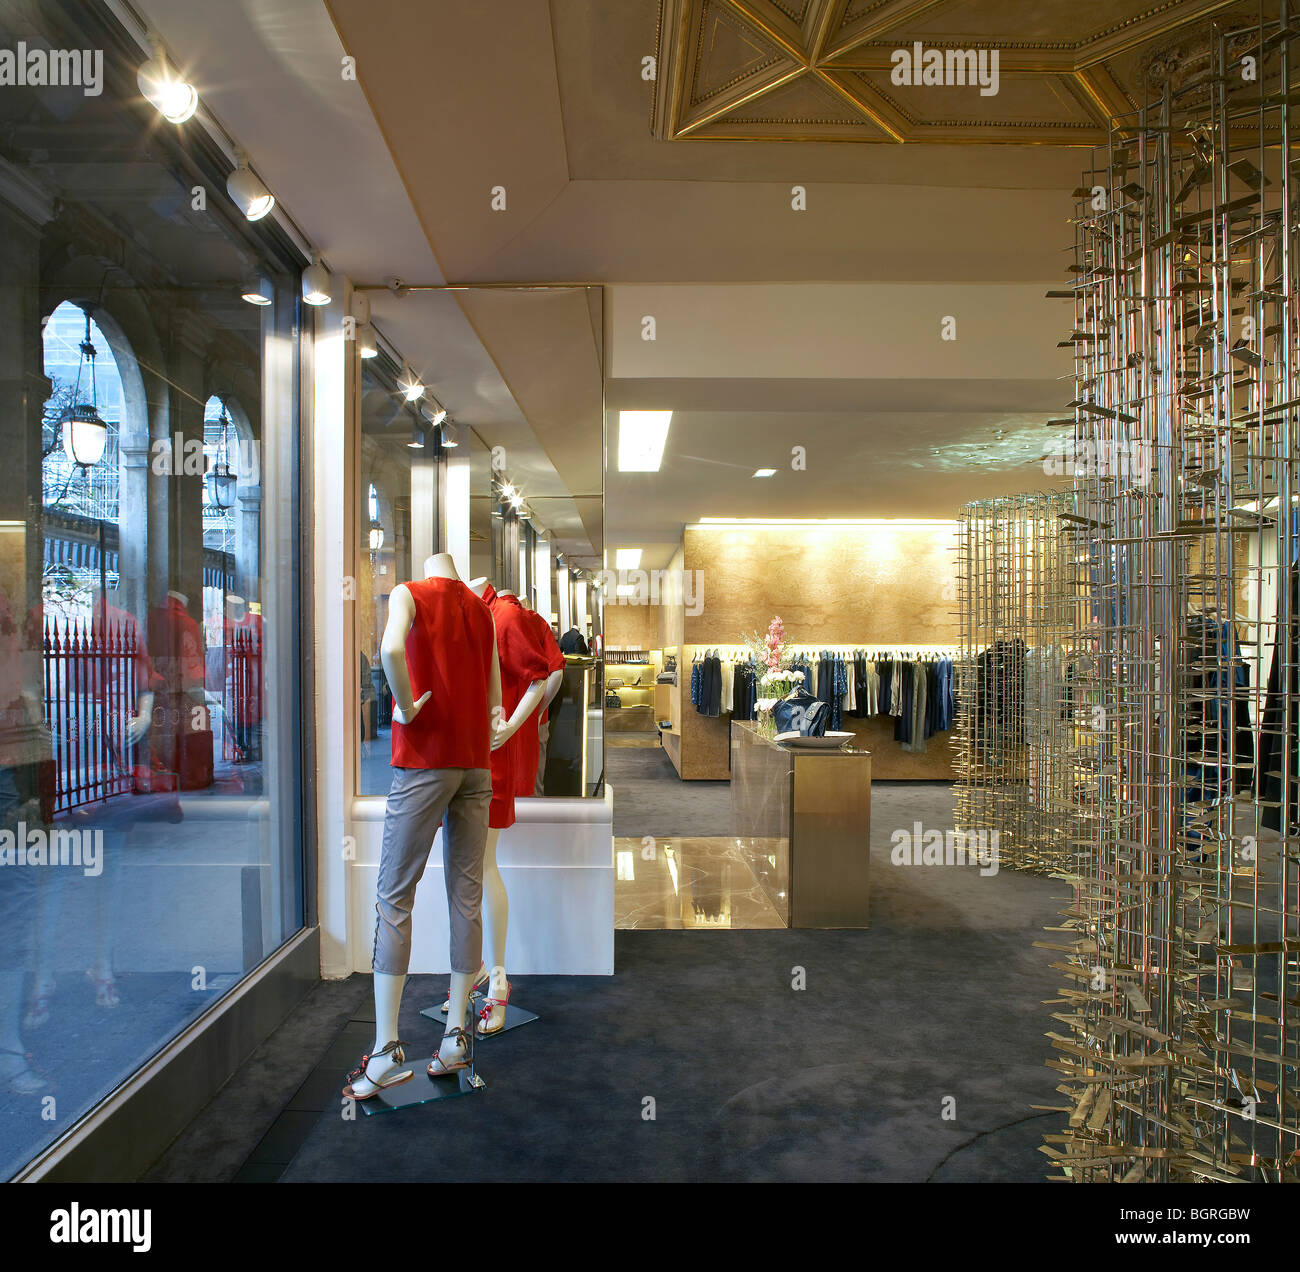 stella mccartney store, interior of store window with mannequins Stock  Photo - Alamy